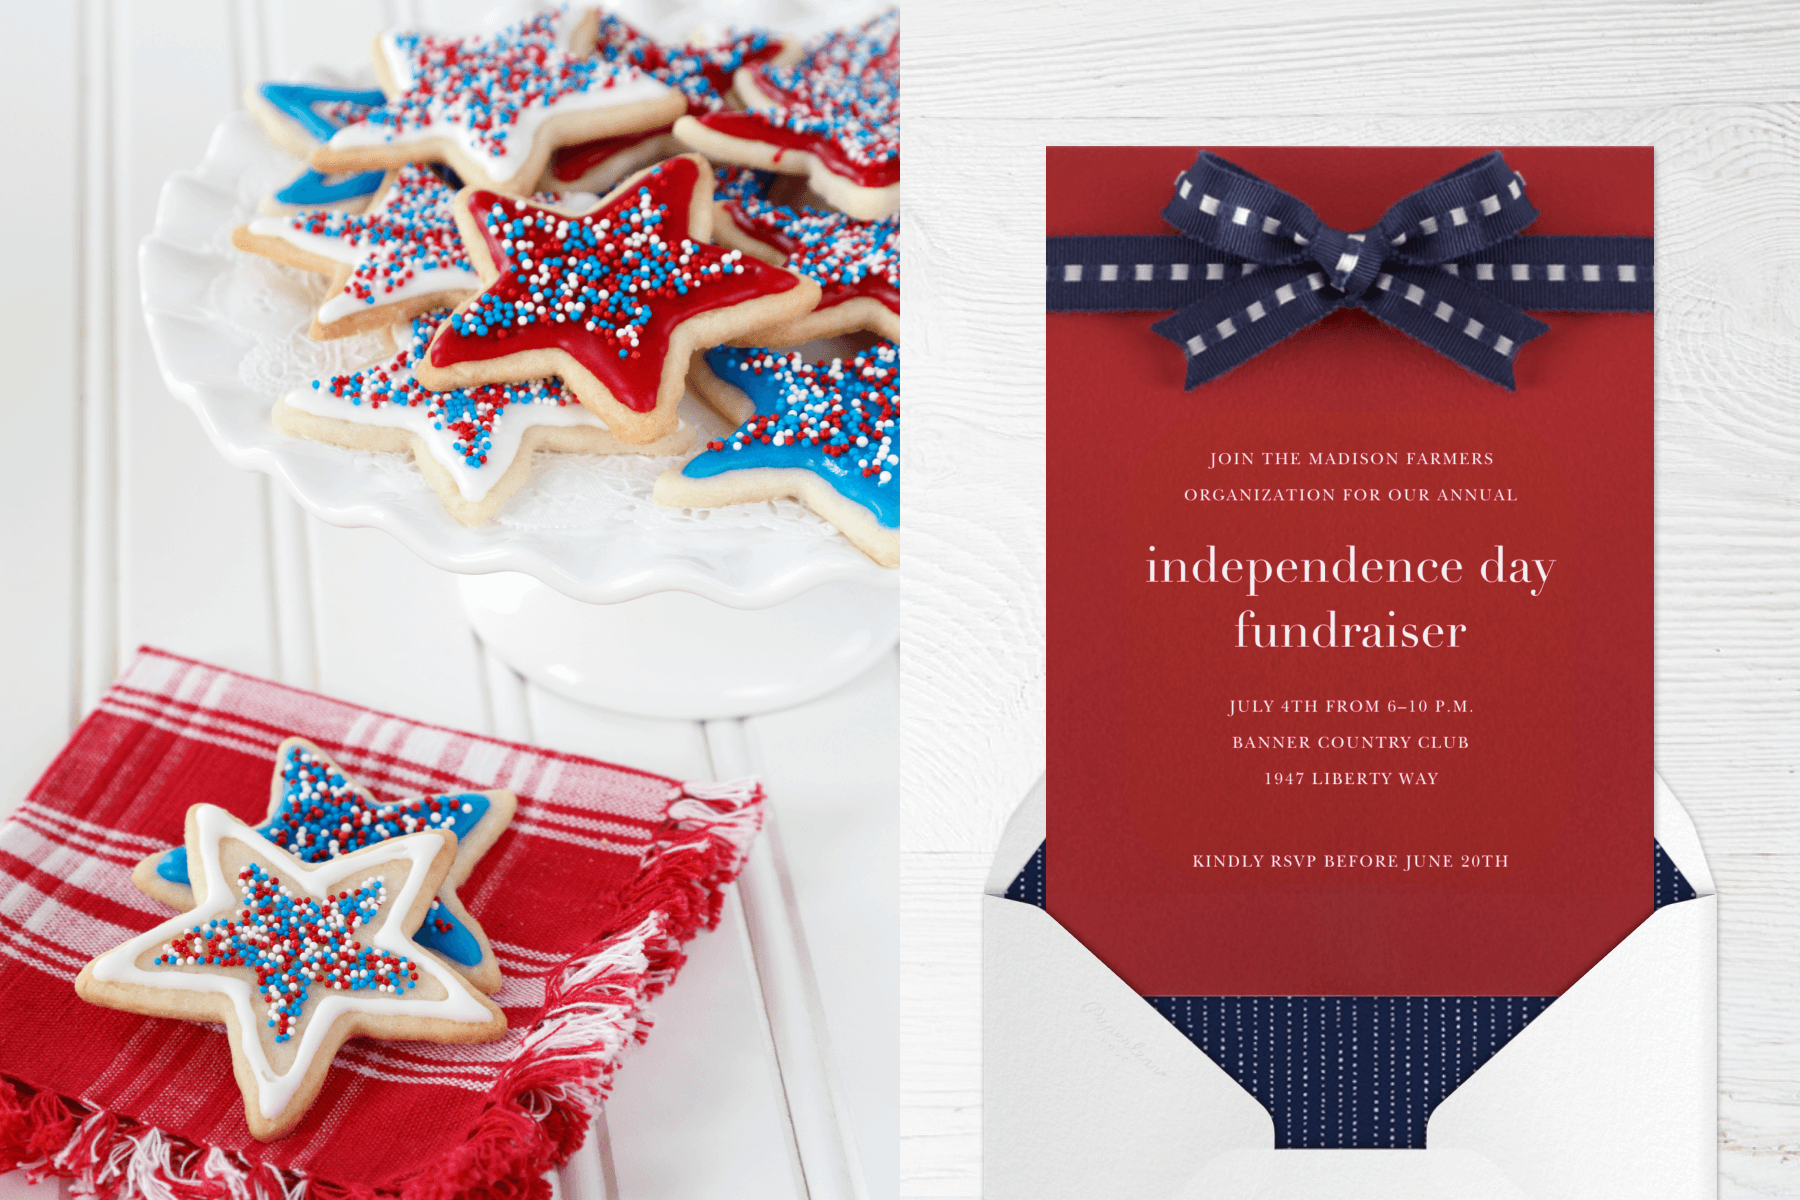 Star-shaped sugar cookies with red, white, and blue frosting and sprinkles; a red invitation with a 3-d navy and white ribbon bow on top.